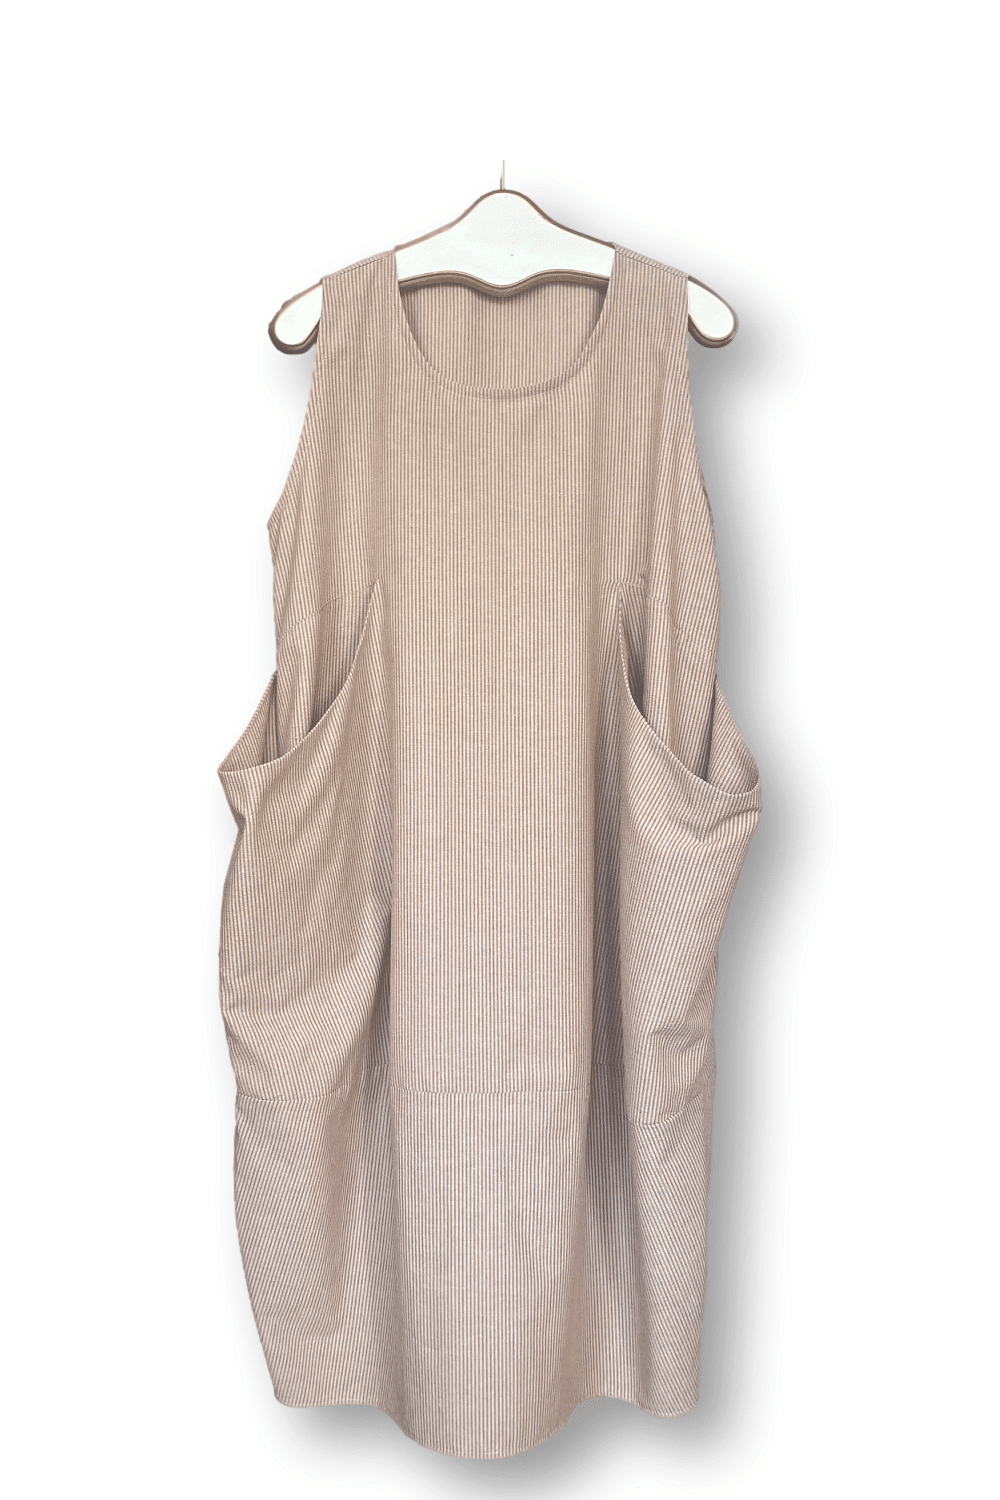 Tank dress with a slight bubble shape. It has 2 large front pockets and is a mocha colored seersucker fabric.